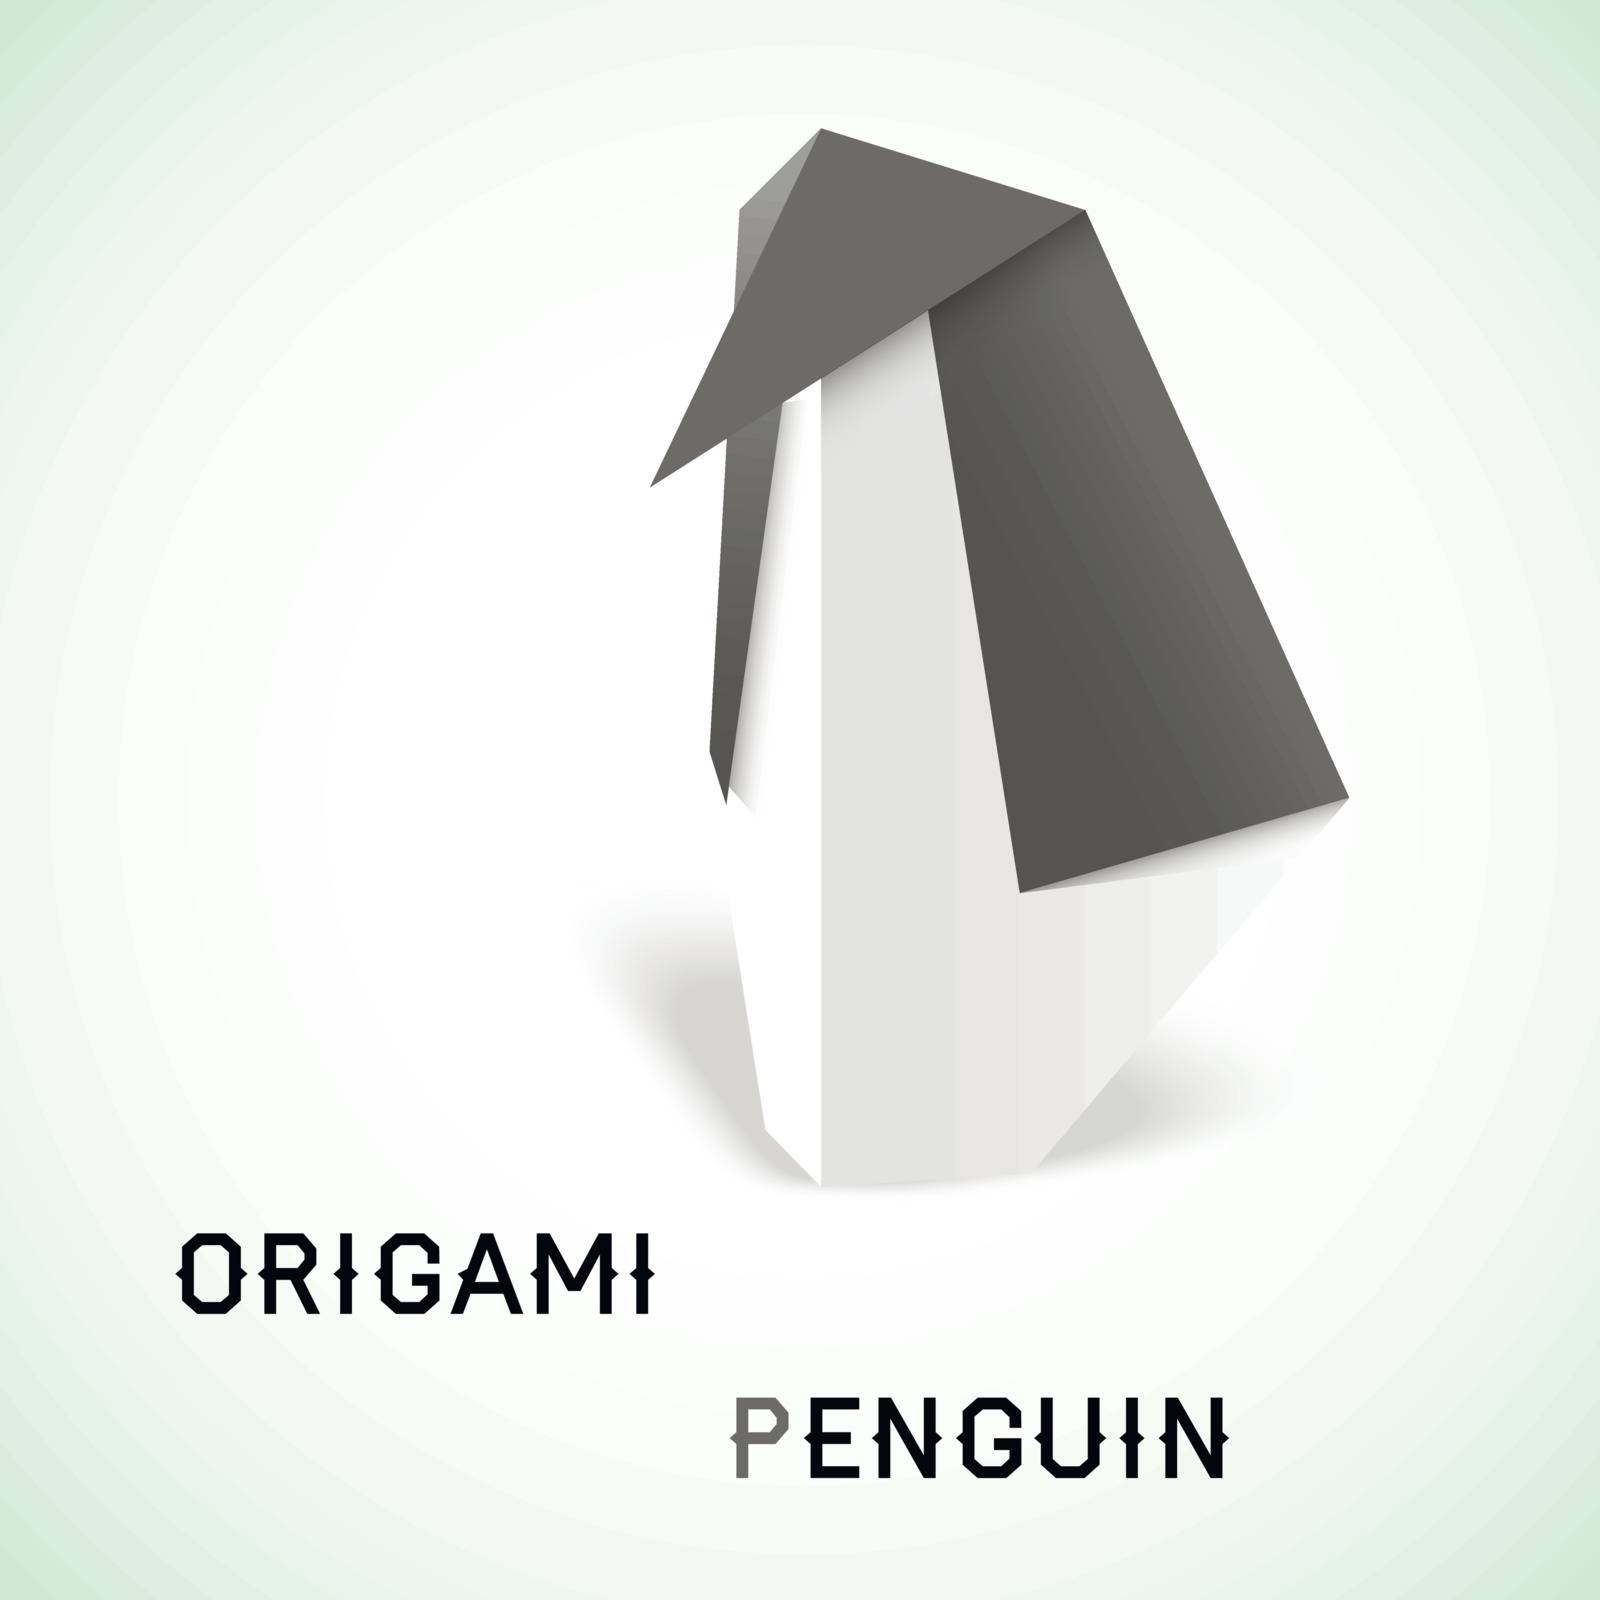 Vector illustration of an origami penguin